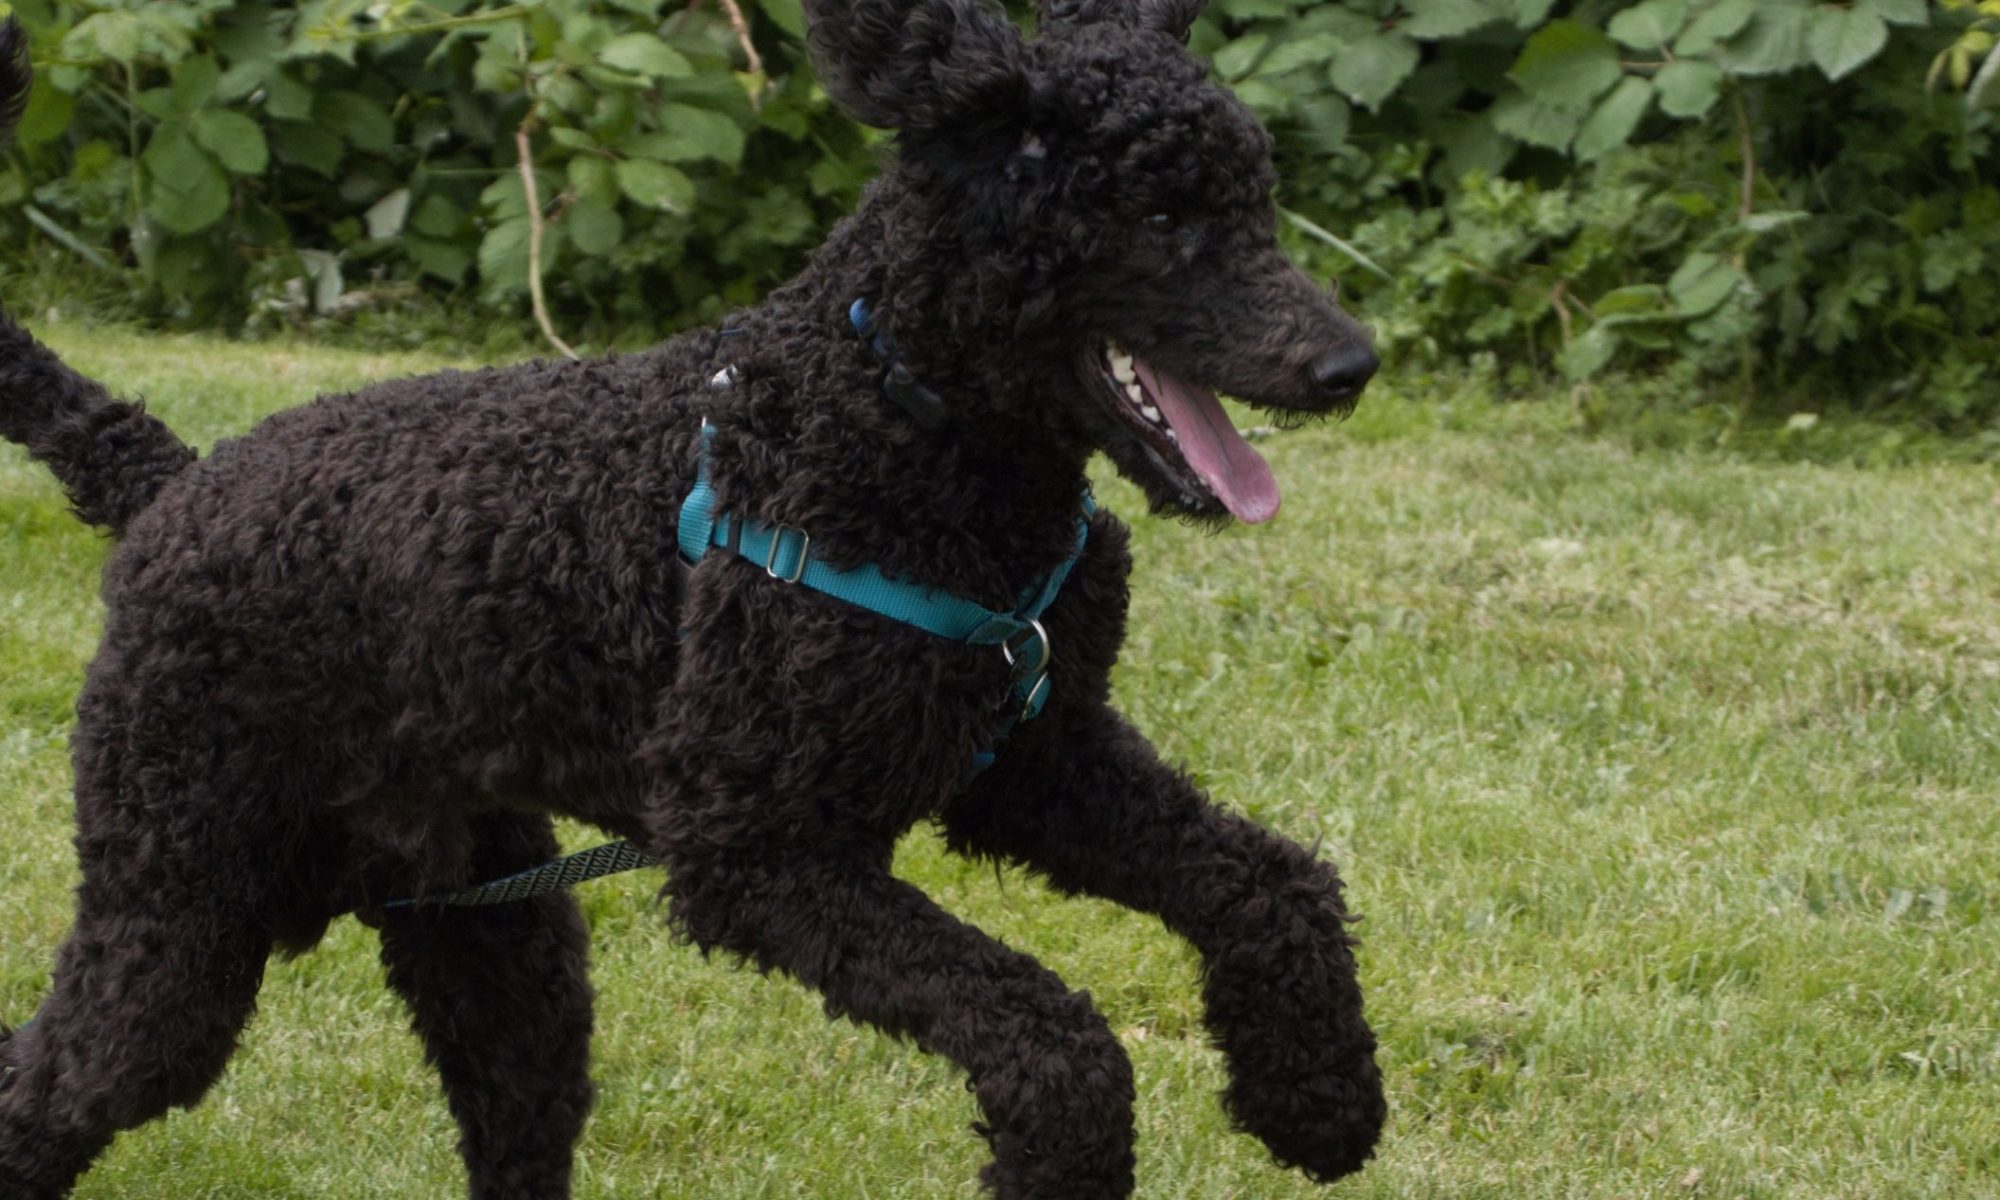 A poodle hopping in the grass